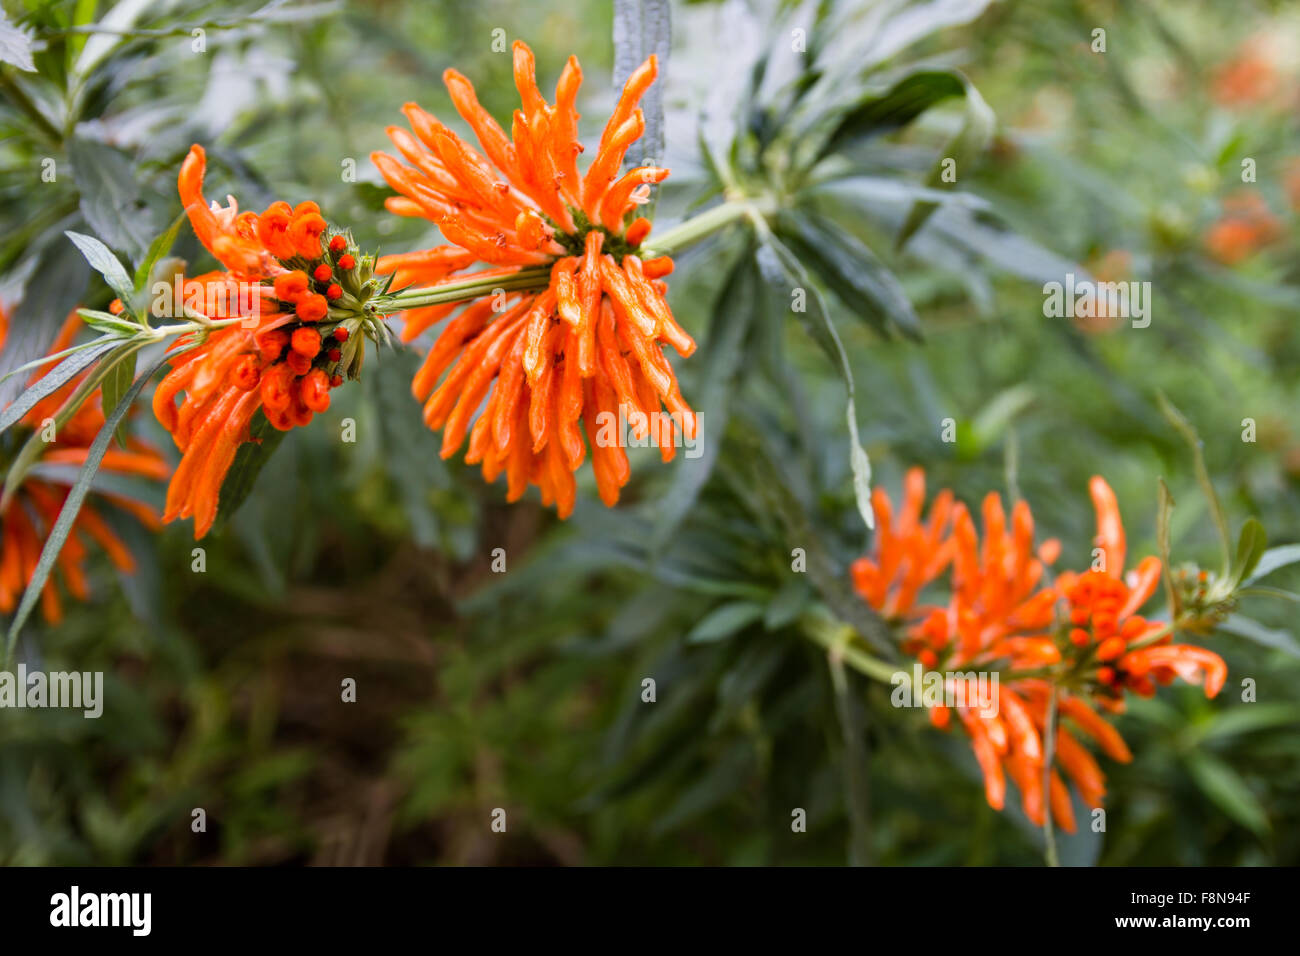 Leonotis leonurus, also known as lion's ear, lion's tail and wild dagga, is a plant species in the Lamiaceae family. The plant i Stock Photo